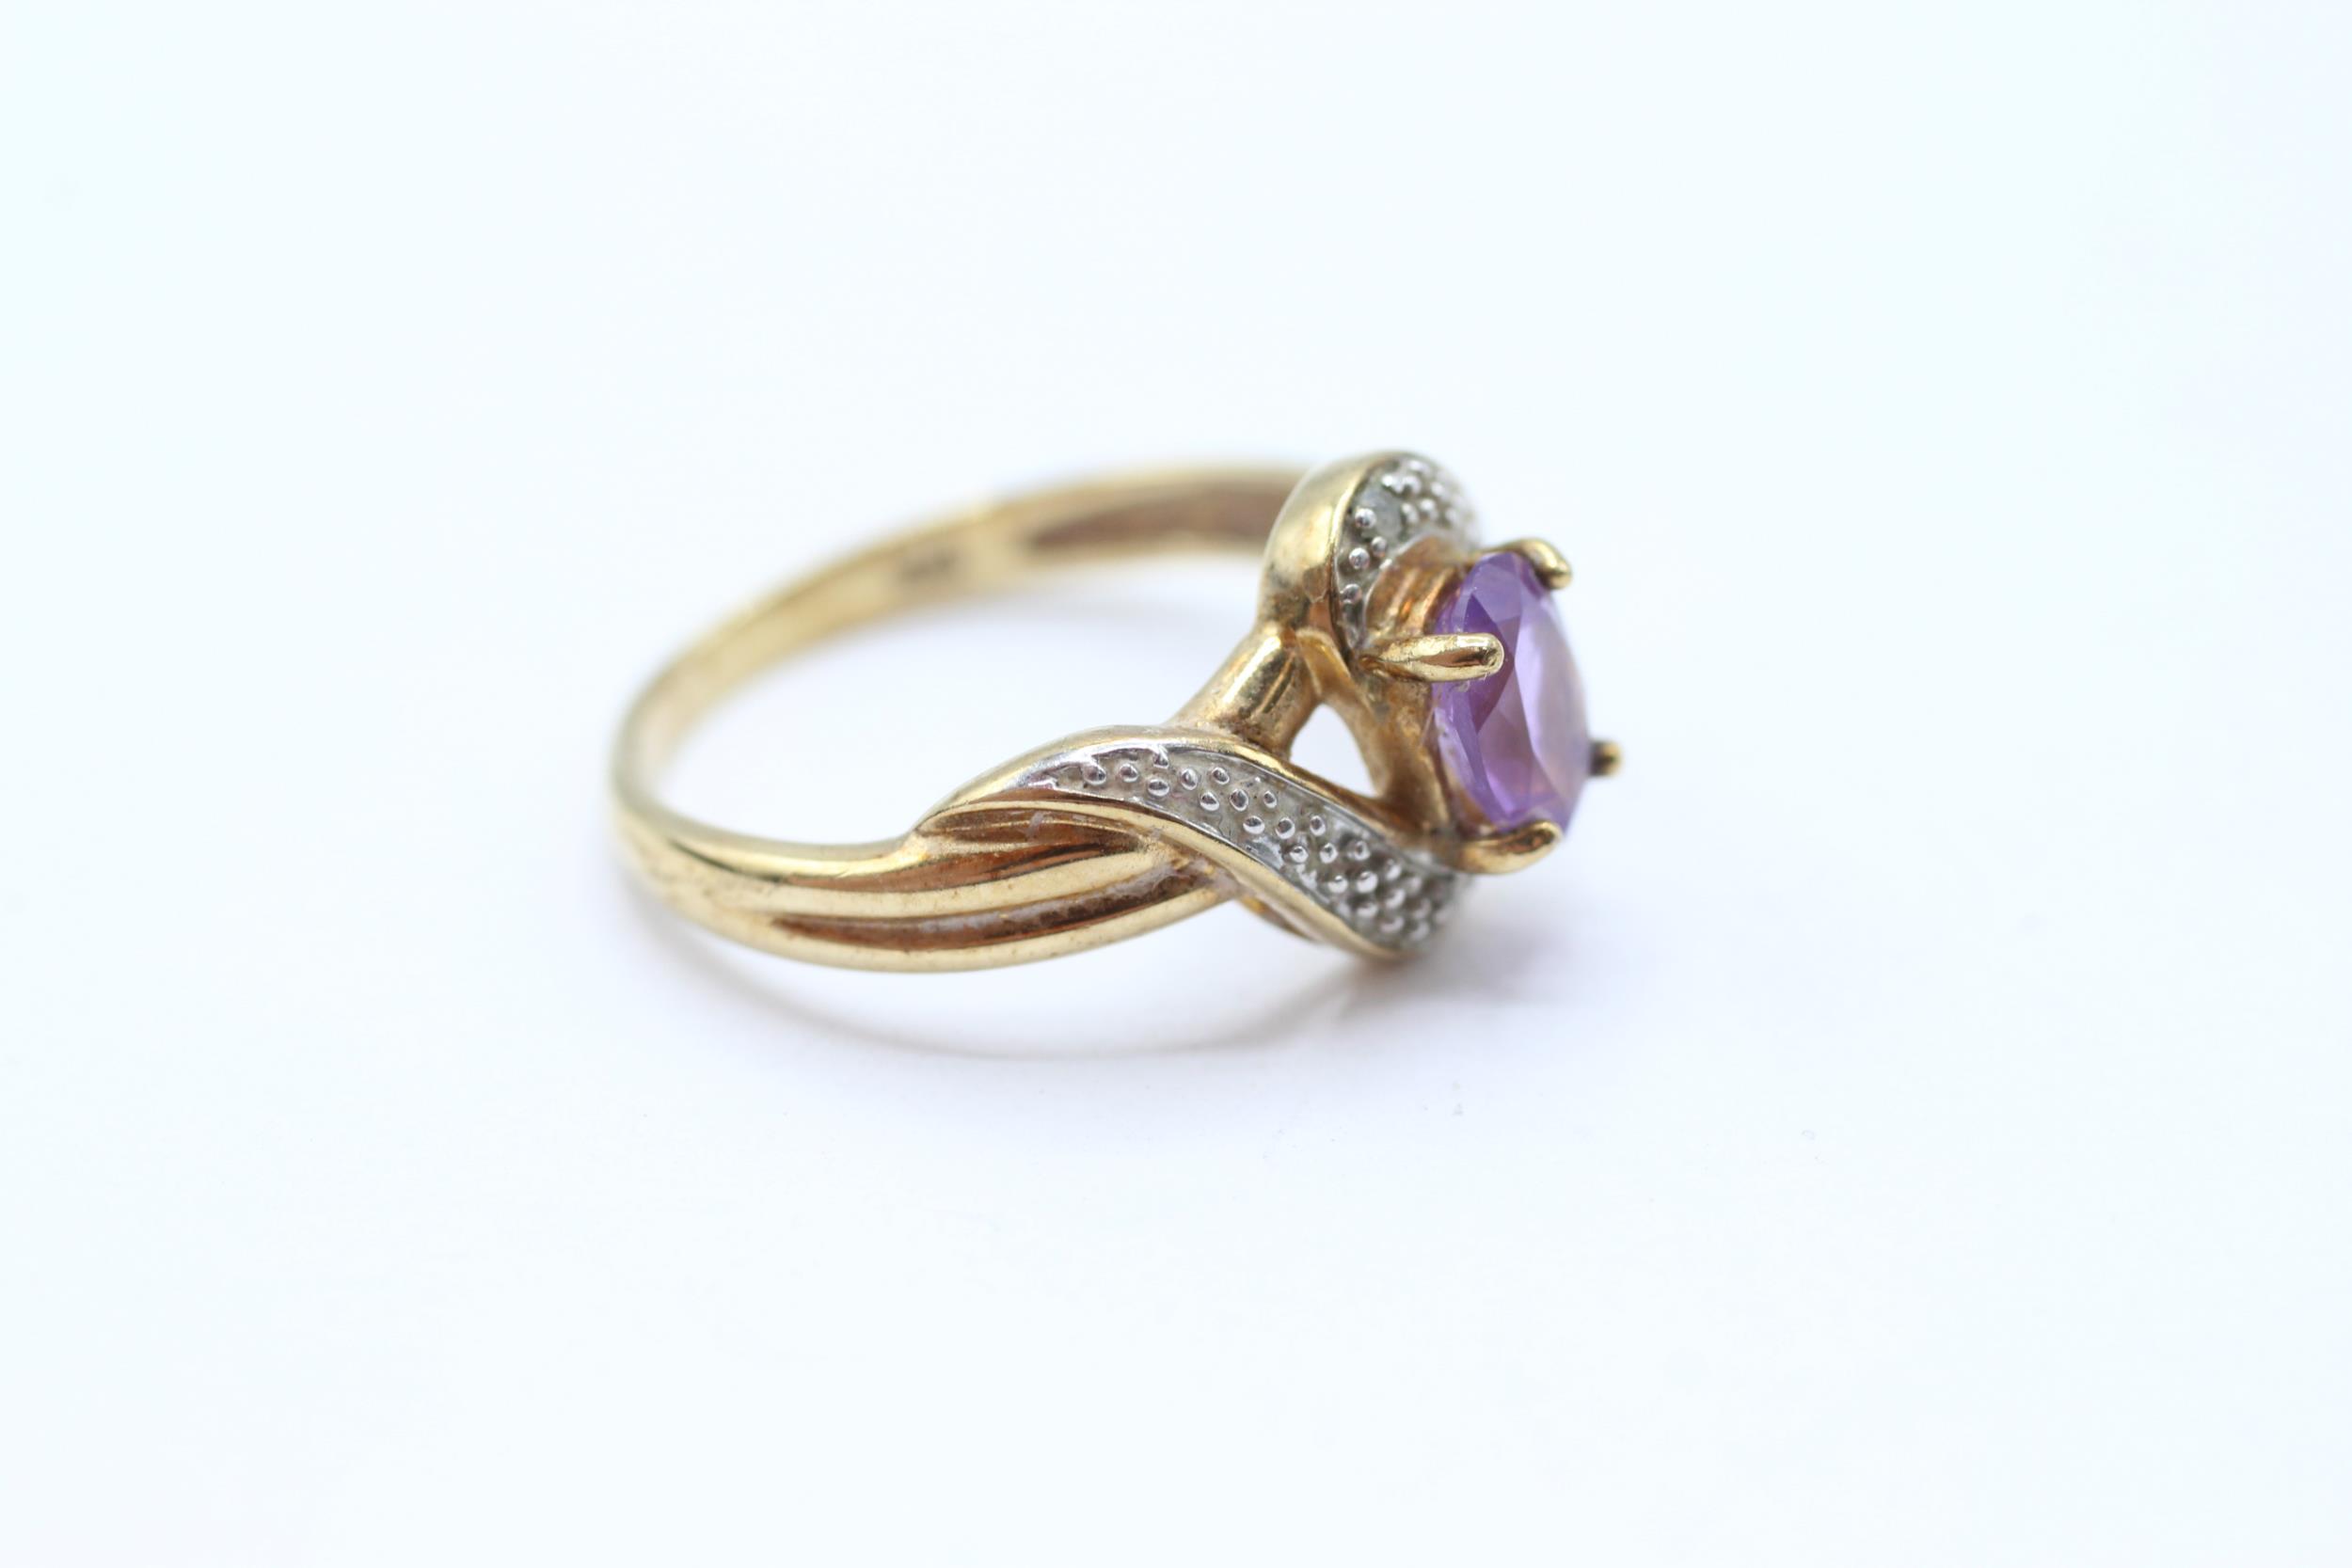 9ct gold amethyst single stone twist ring with diamond accent Size M 2.3 g - Image 2 of 4